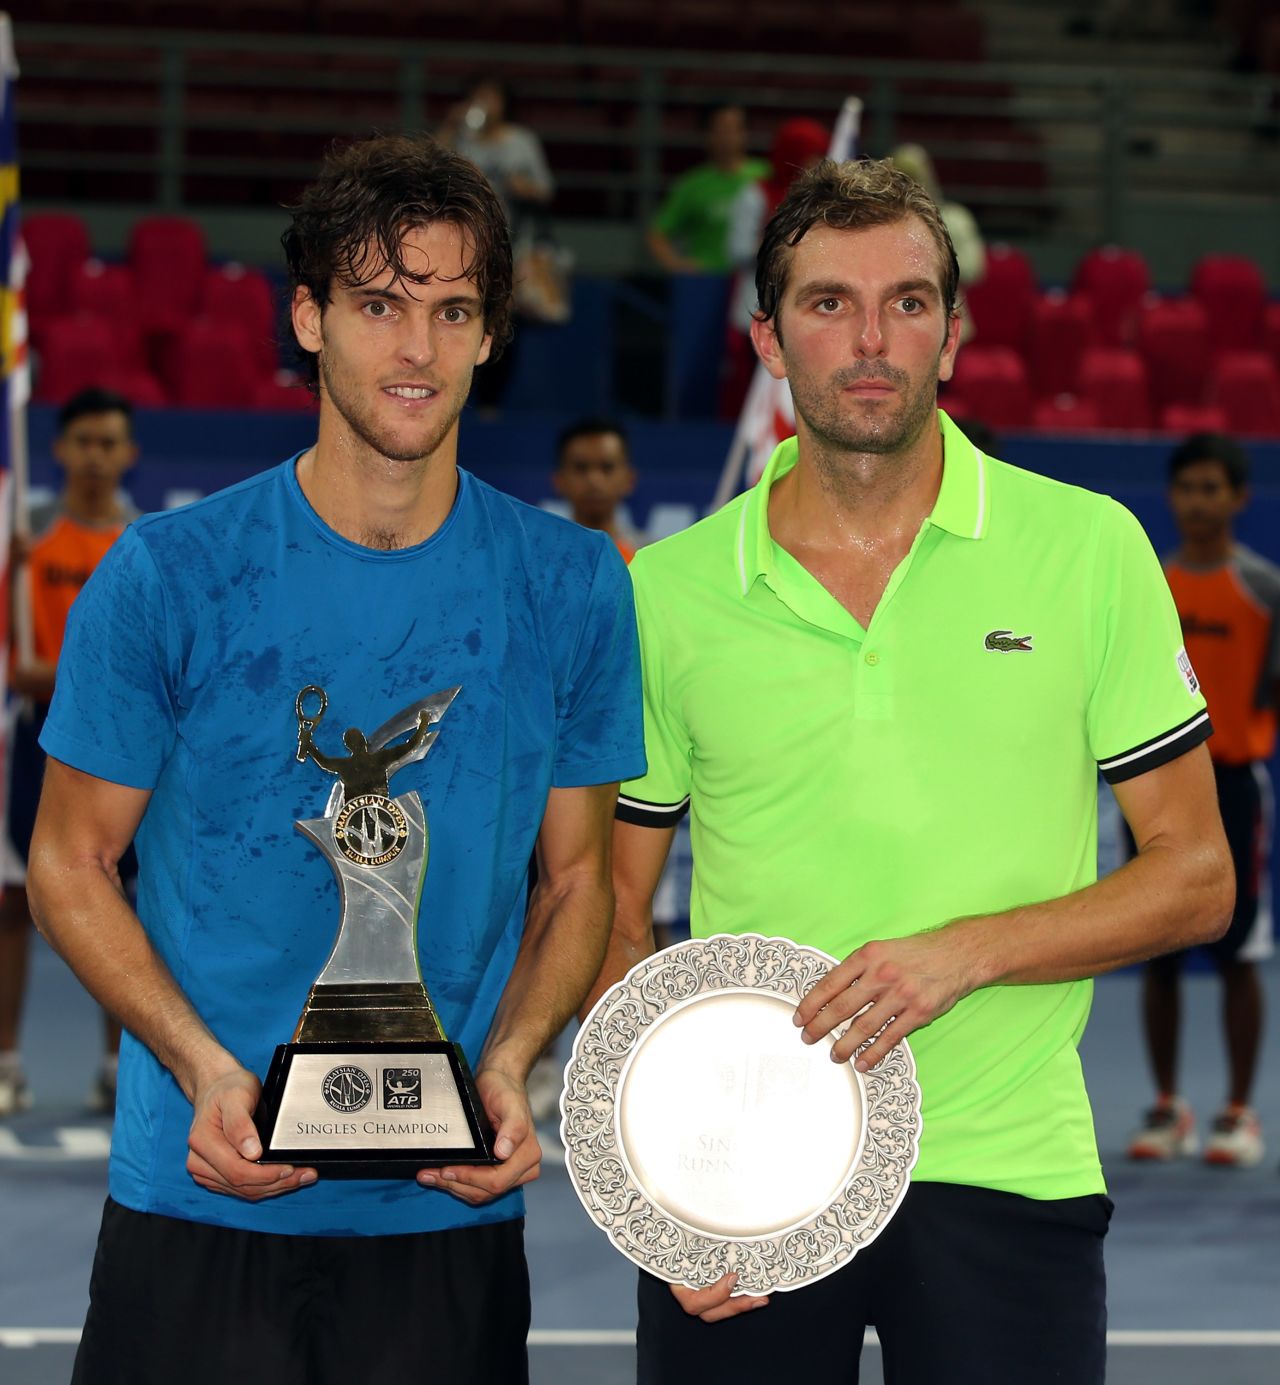 He said his most painful loss in a final came against Joao Sousa in Kuala Lumpur in 2013 when he held a match point. 